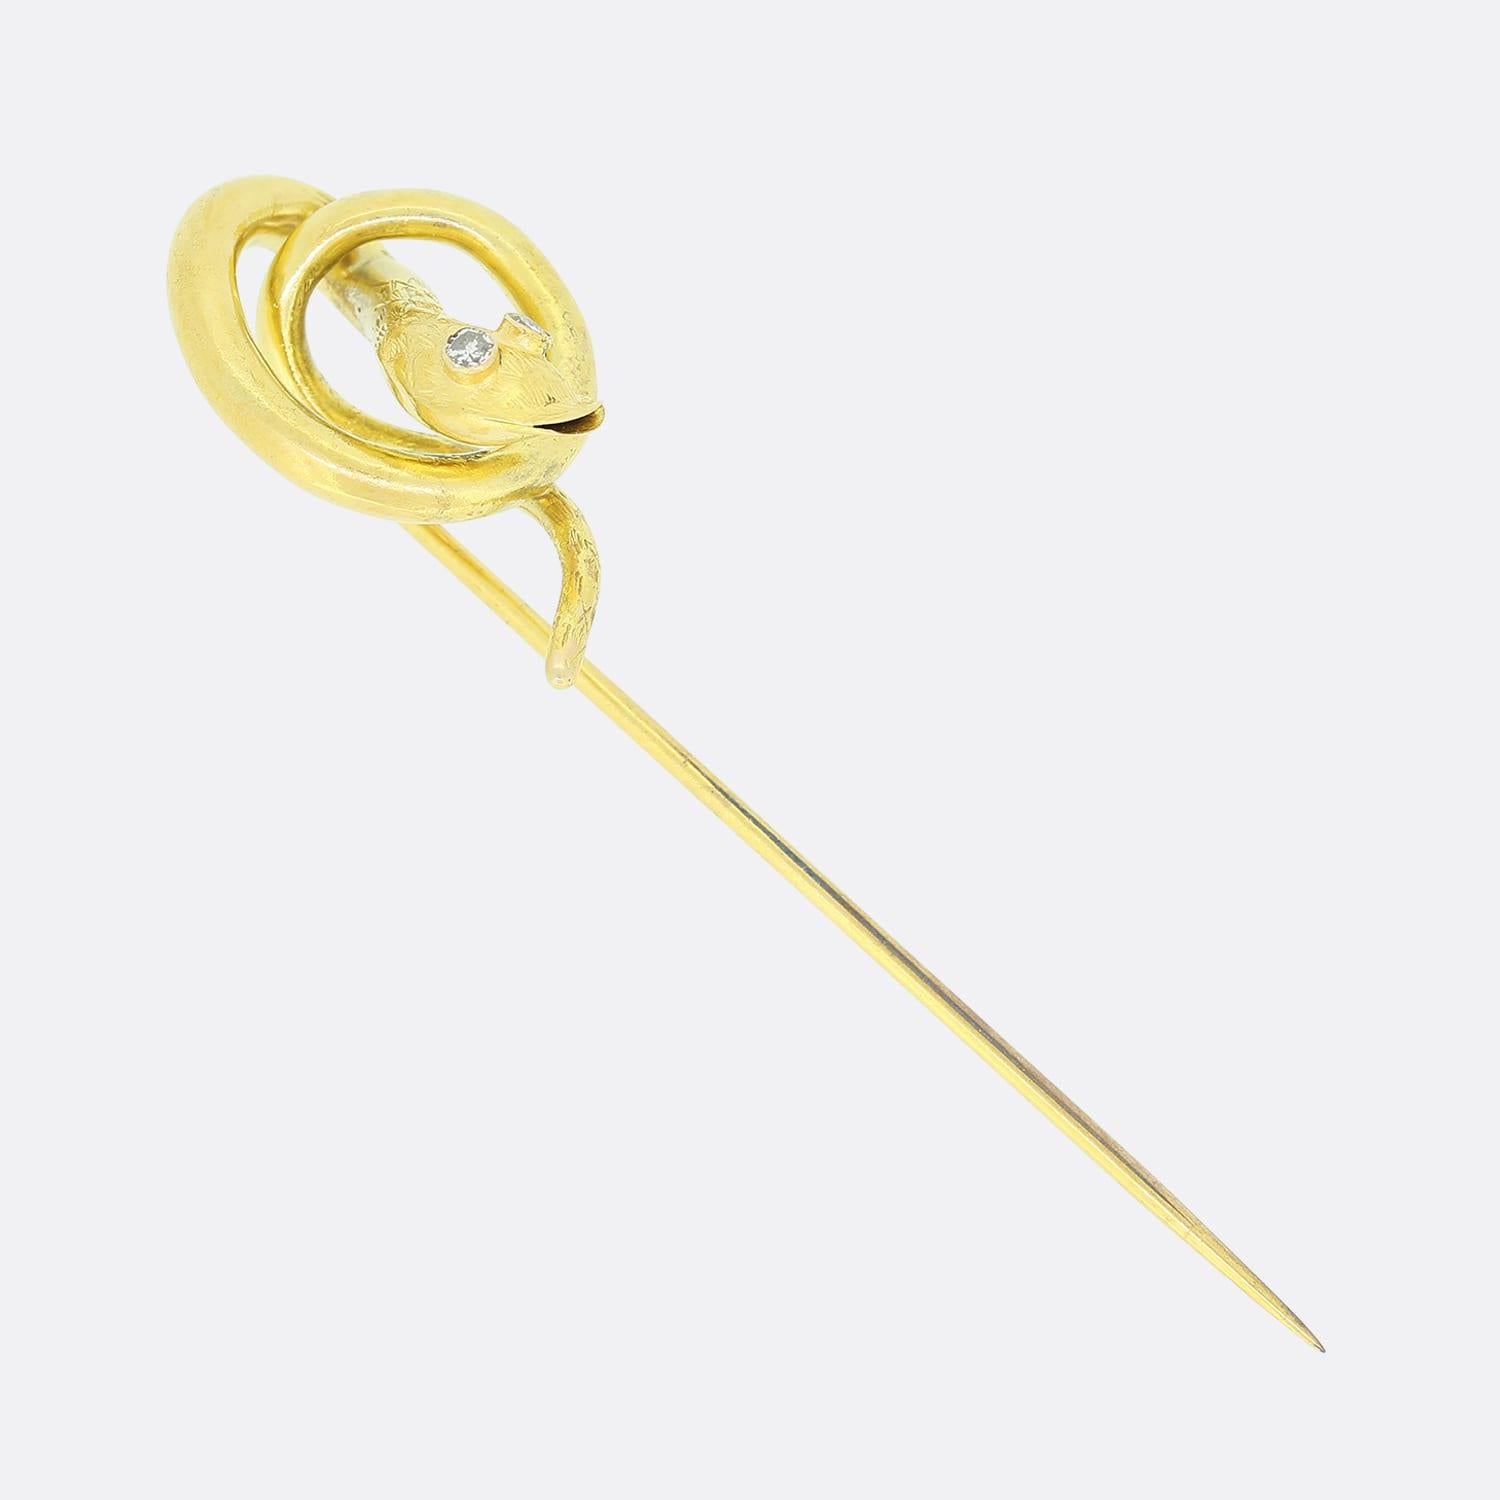 This is a Vintage gold diamond set snake stick pin. The stick pins head is in a snake motif and set with two single cut diamonds in the eyes and crafted in 18ct yellow gold. 

Condition: Used (Very Good)
Weight: 2.6 grams
Dimensions: 68mm x 15mm x